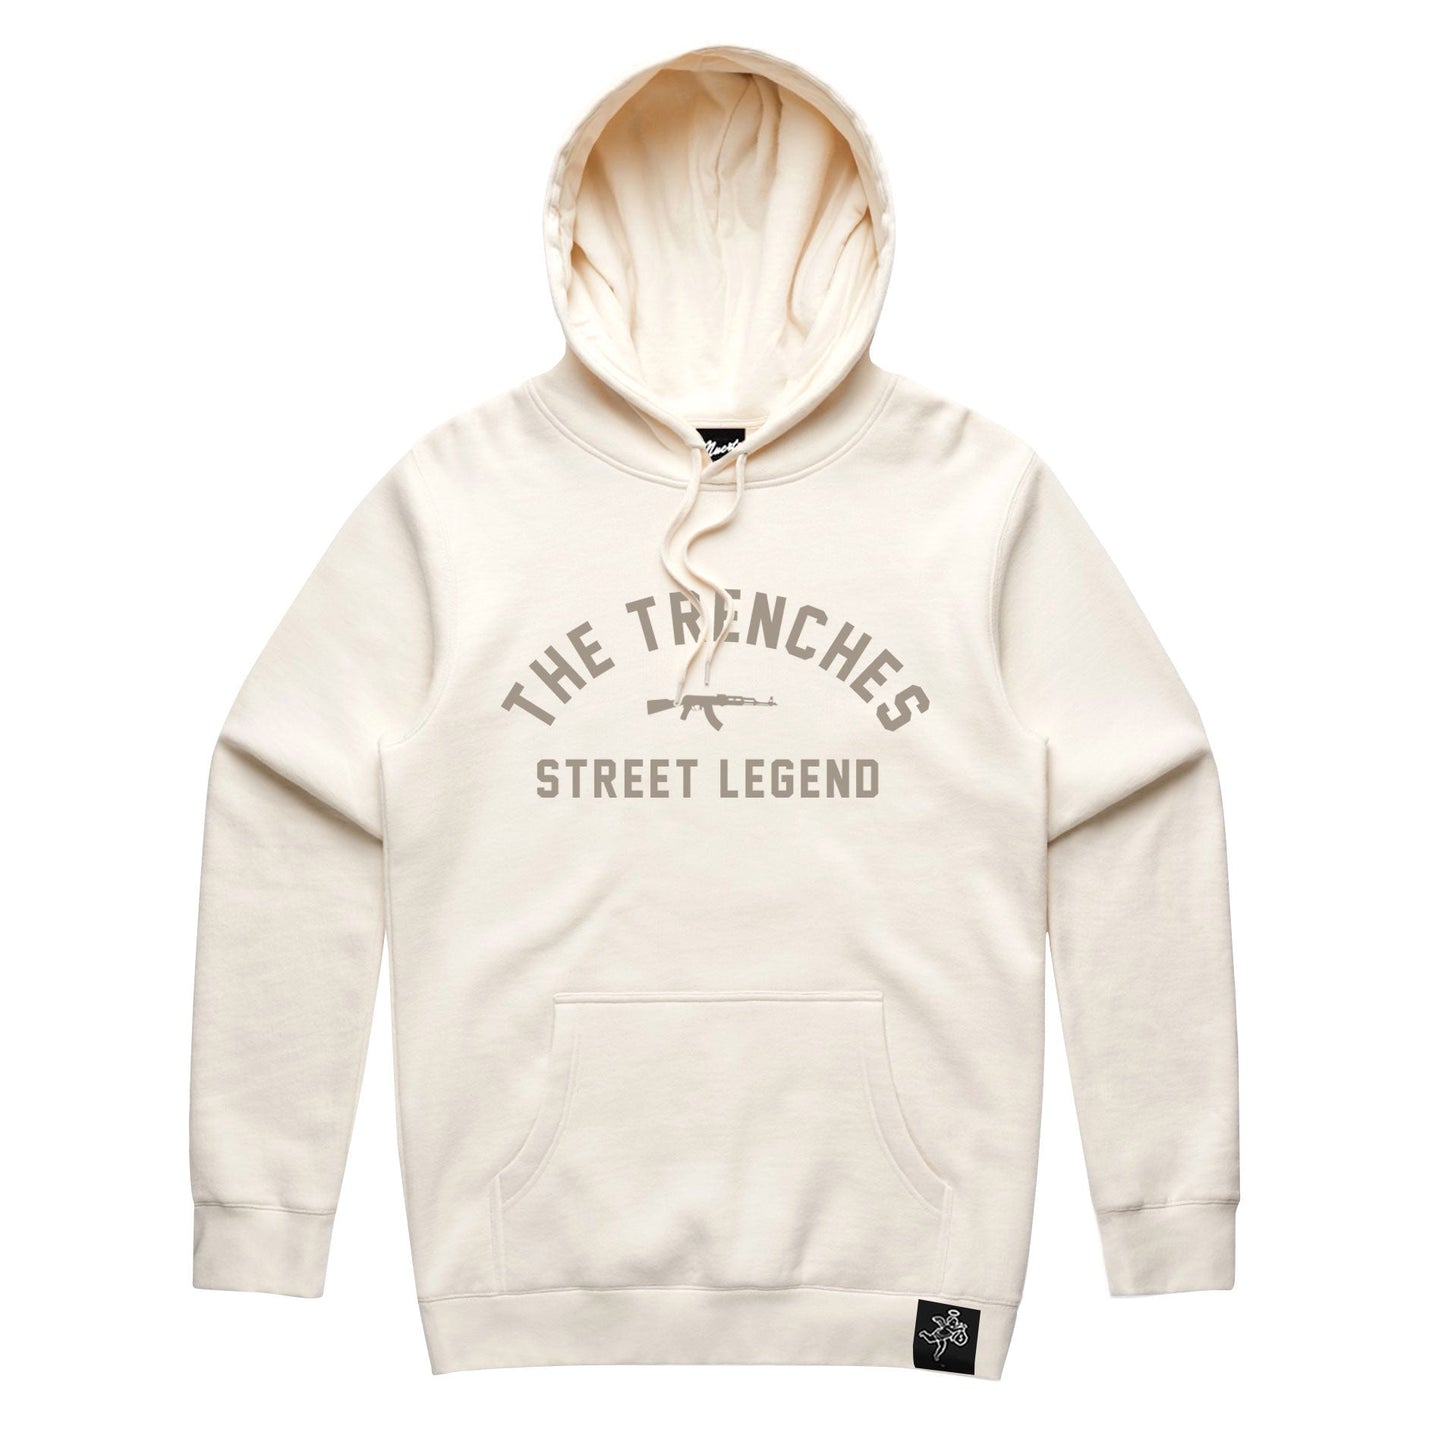 AK The Trenches Hoodie